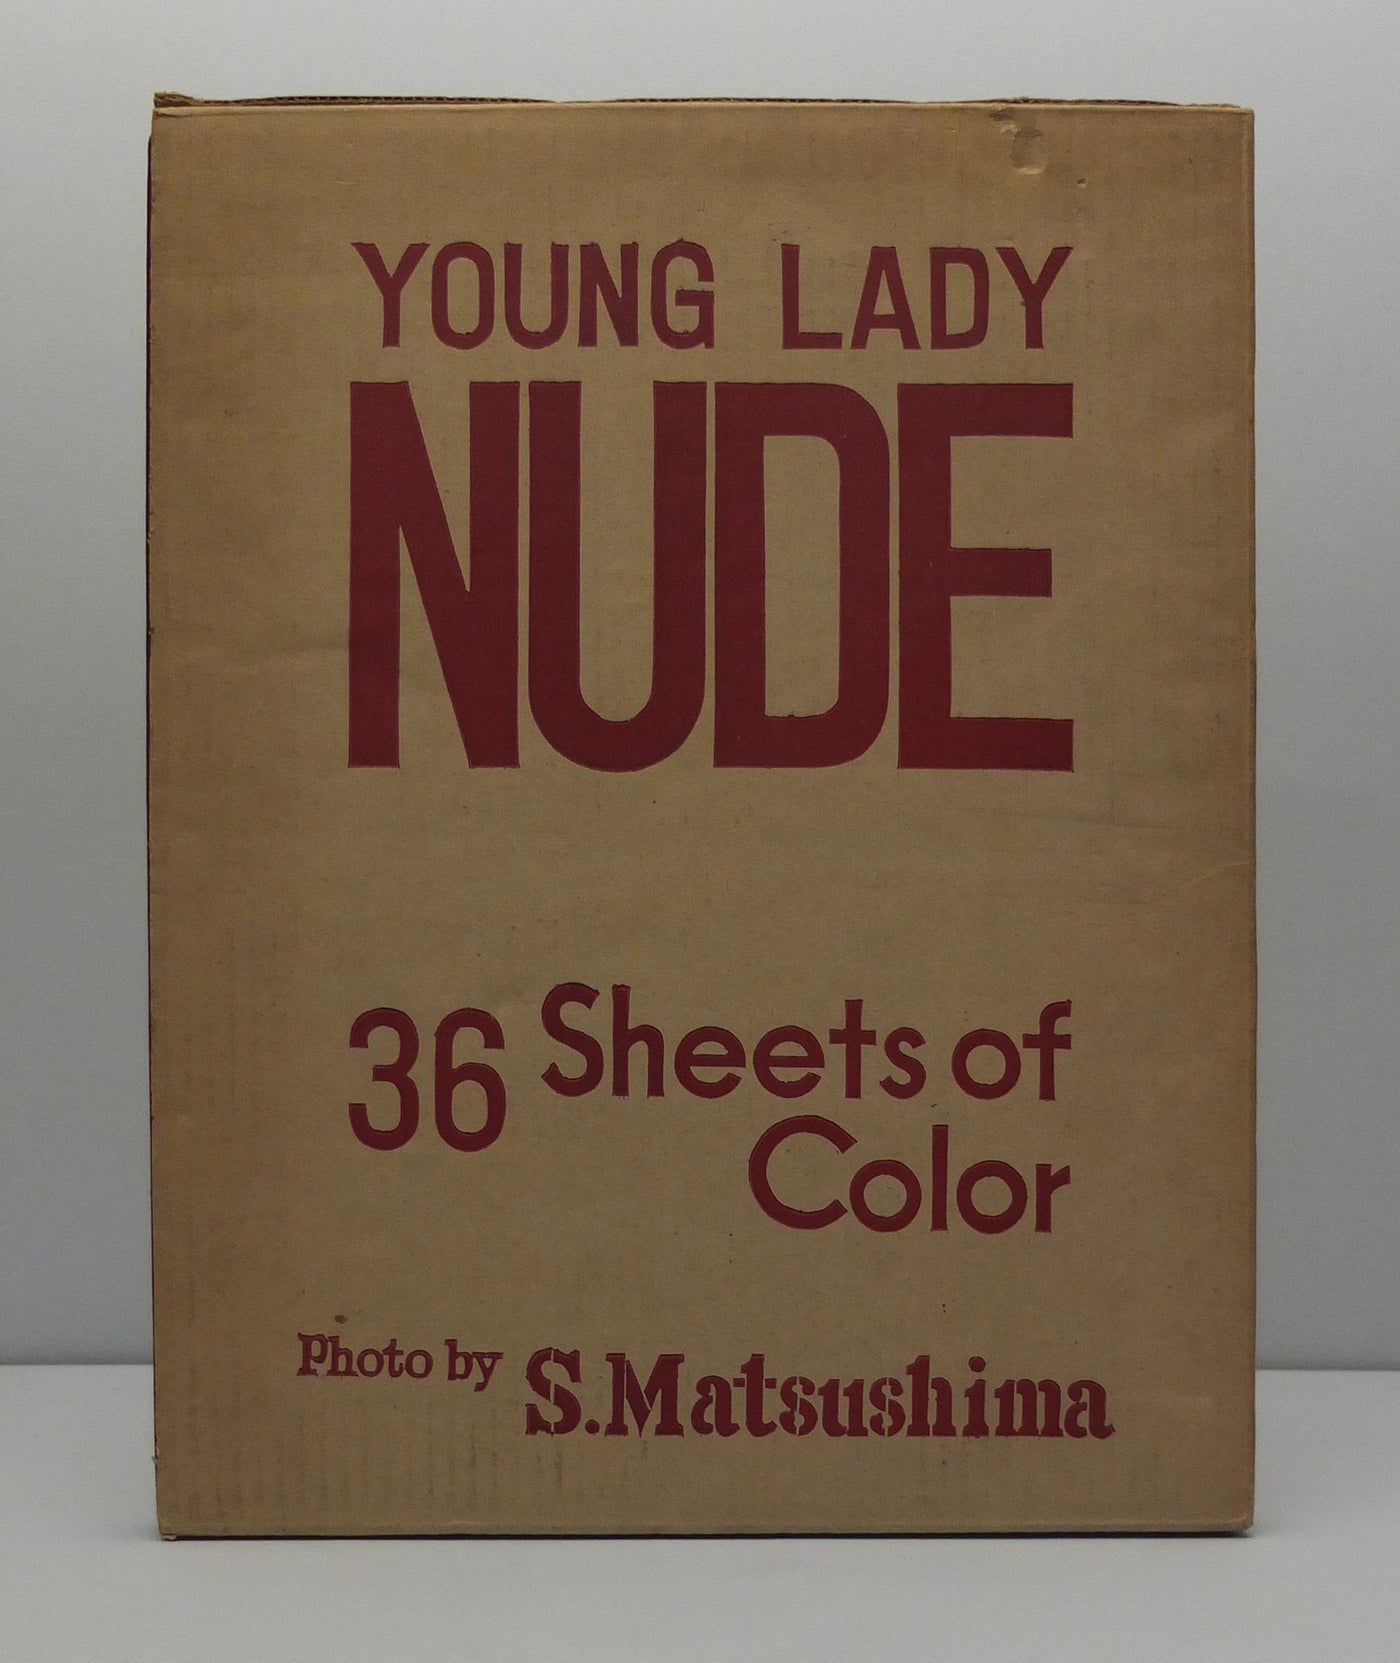 Young Lady Nude by S.Matsushima}